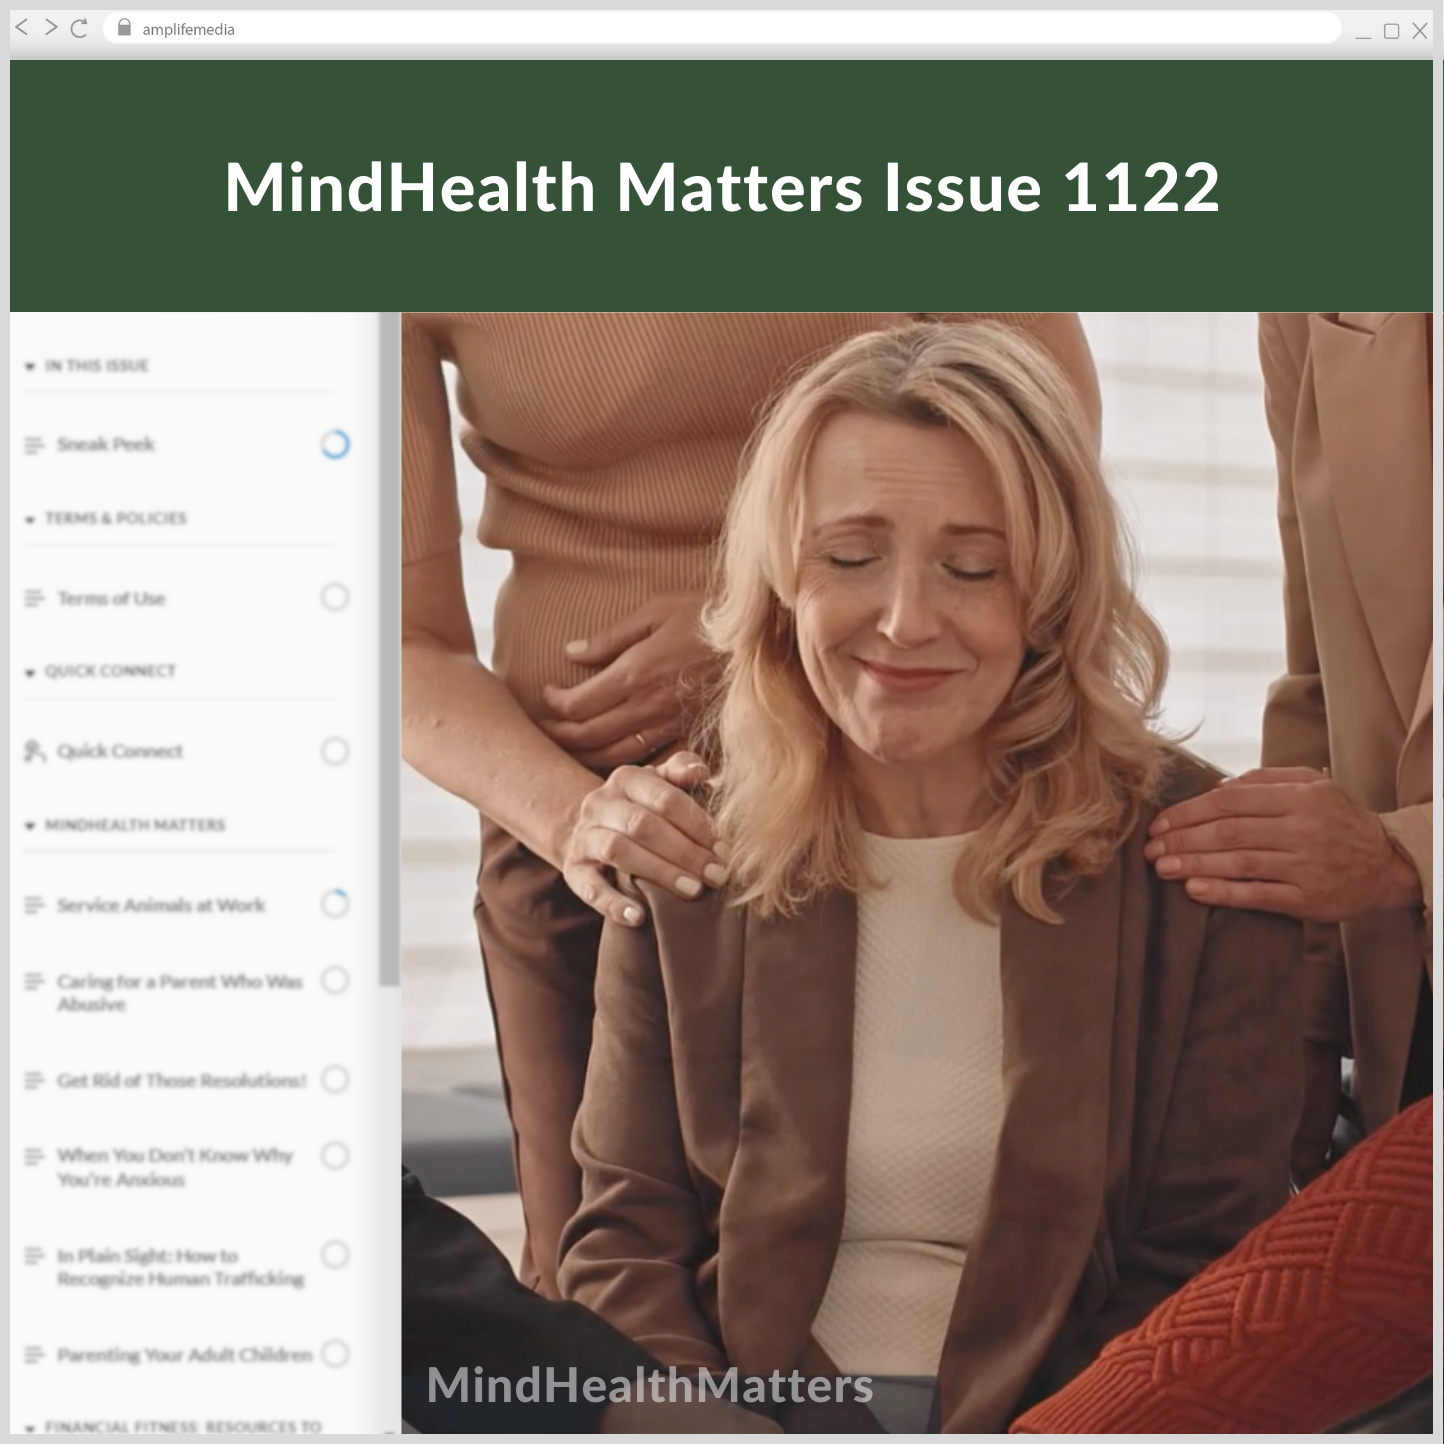 Subscription to Wellbeing Media: MindHealth Matters 1122